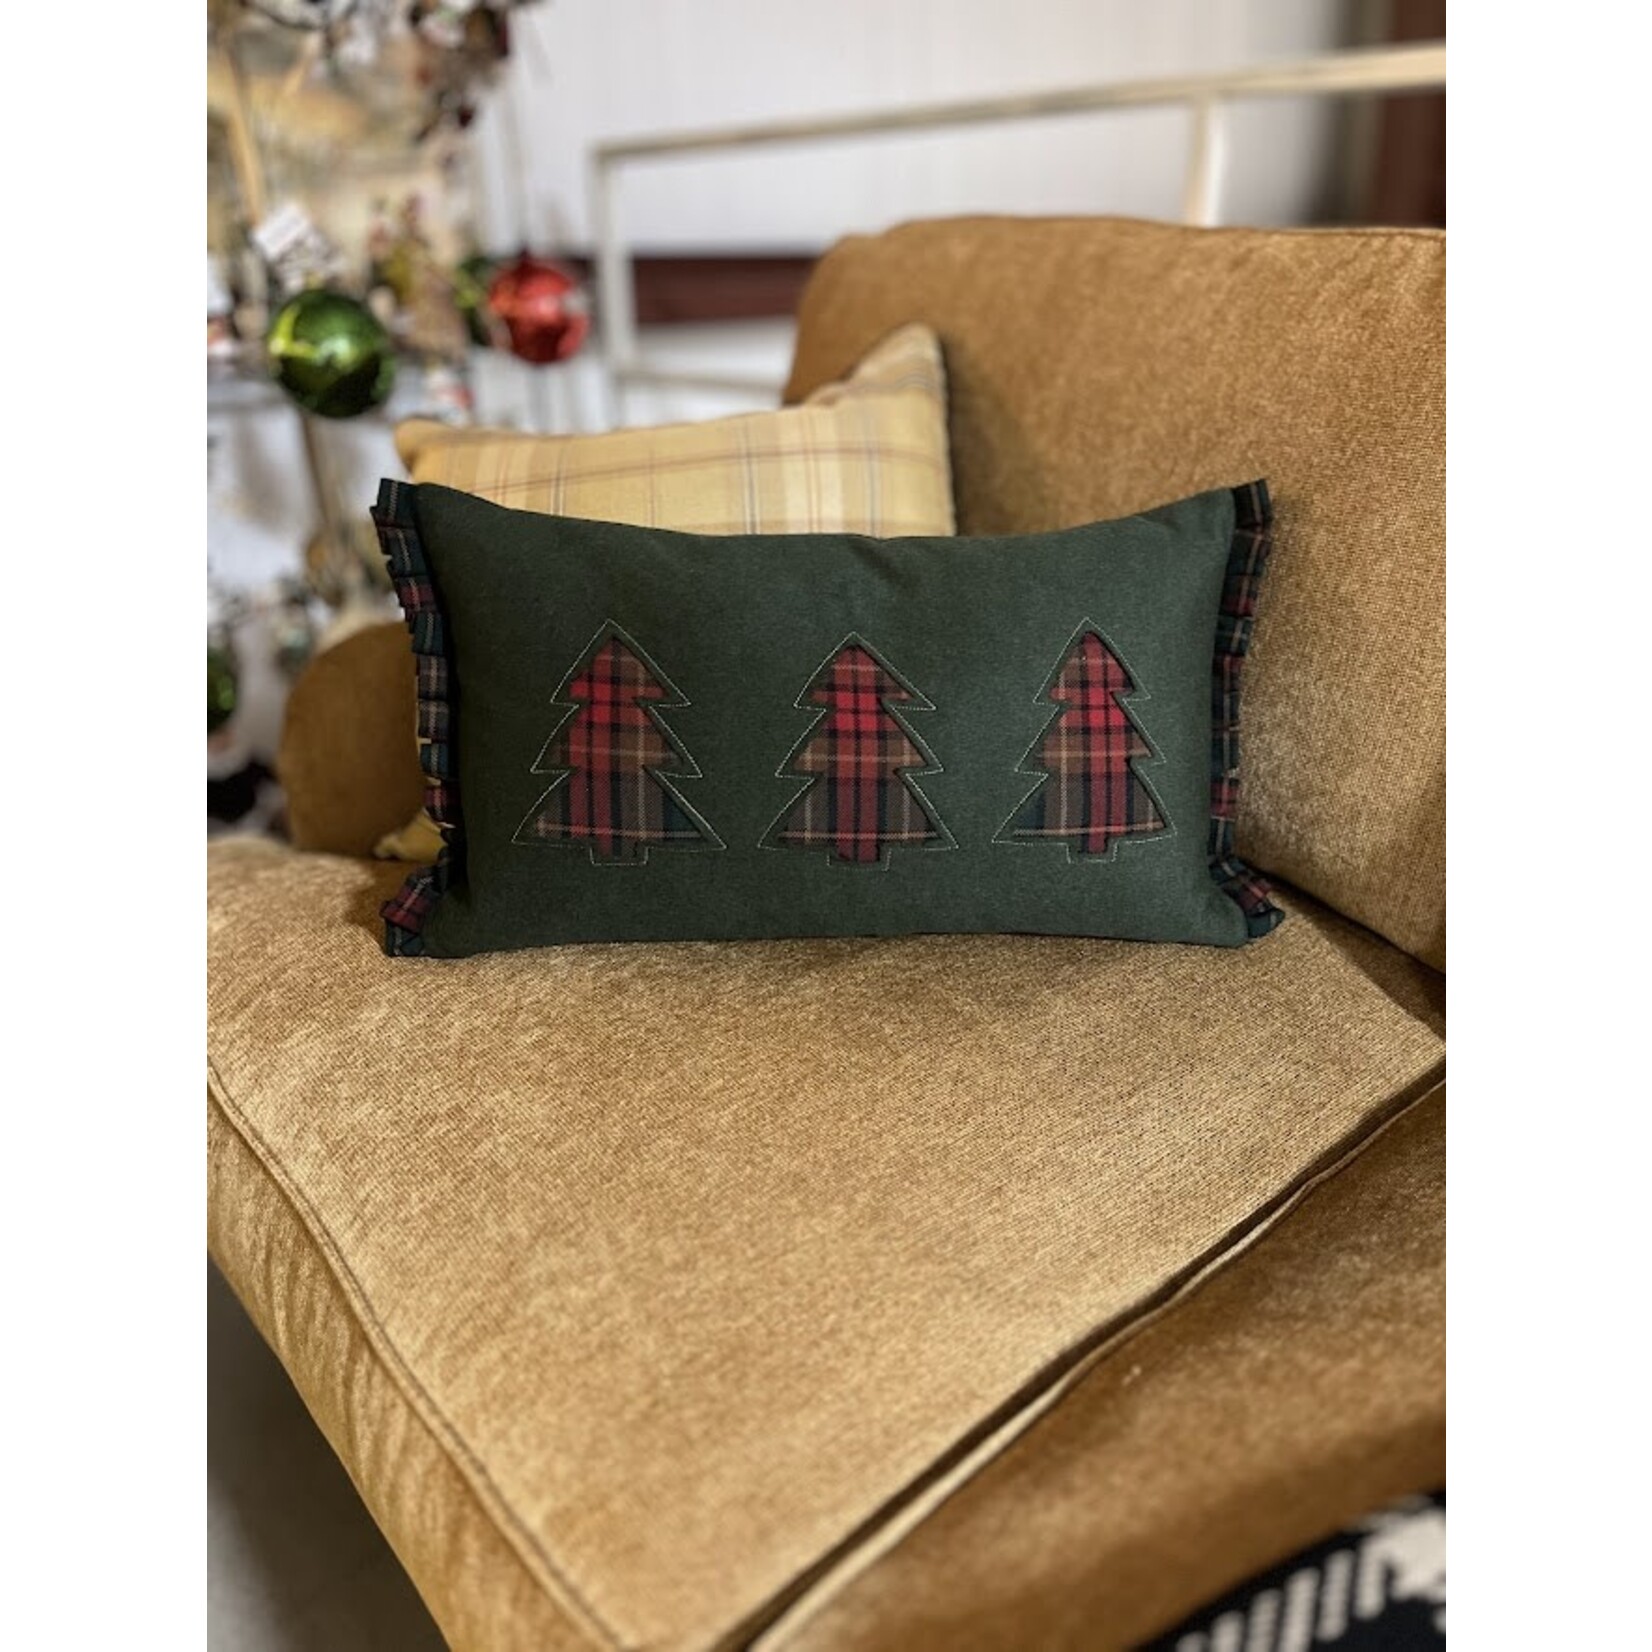 Eastern Accents Three Plaid Holiday Trees Pillow 10x22